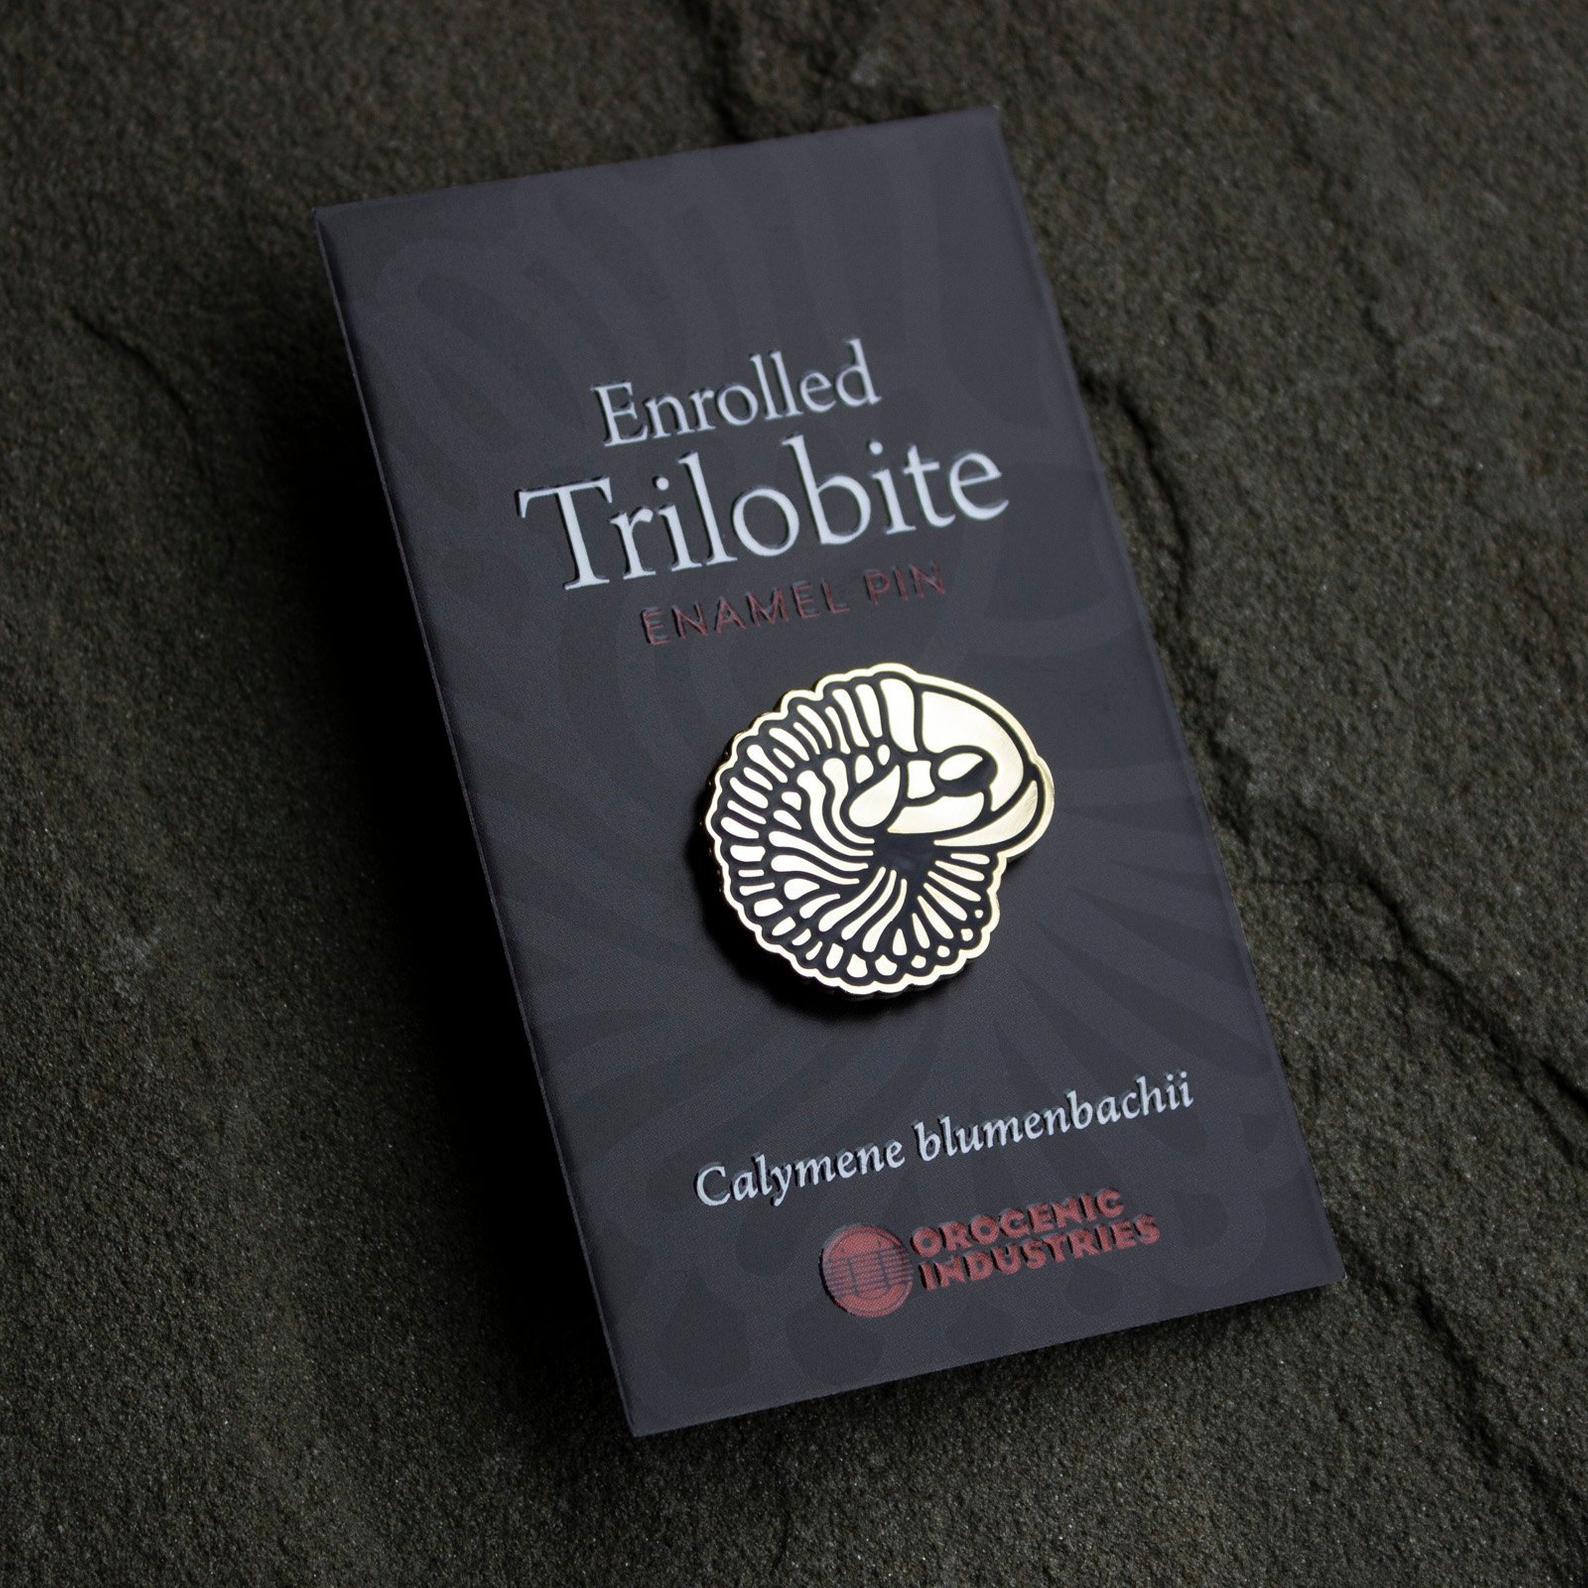 Gold enrolled trilobite enamel pin by Orogenic Industries